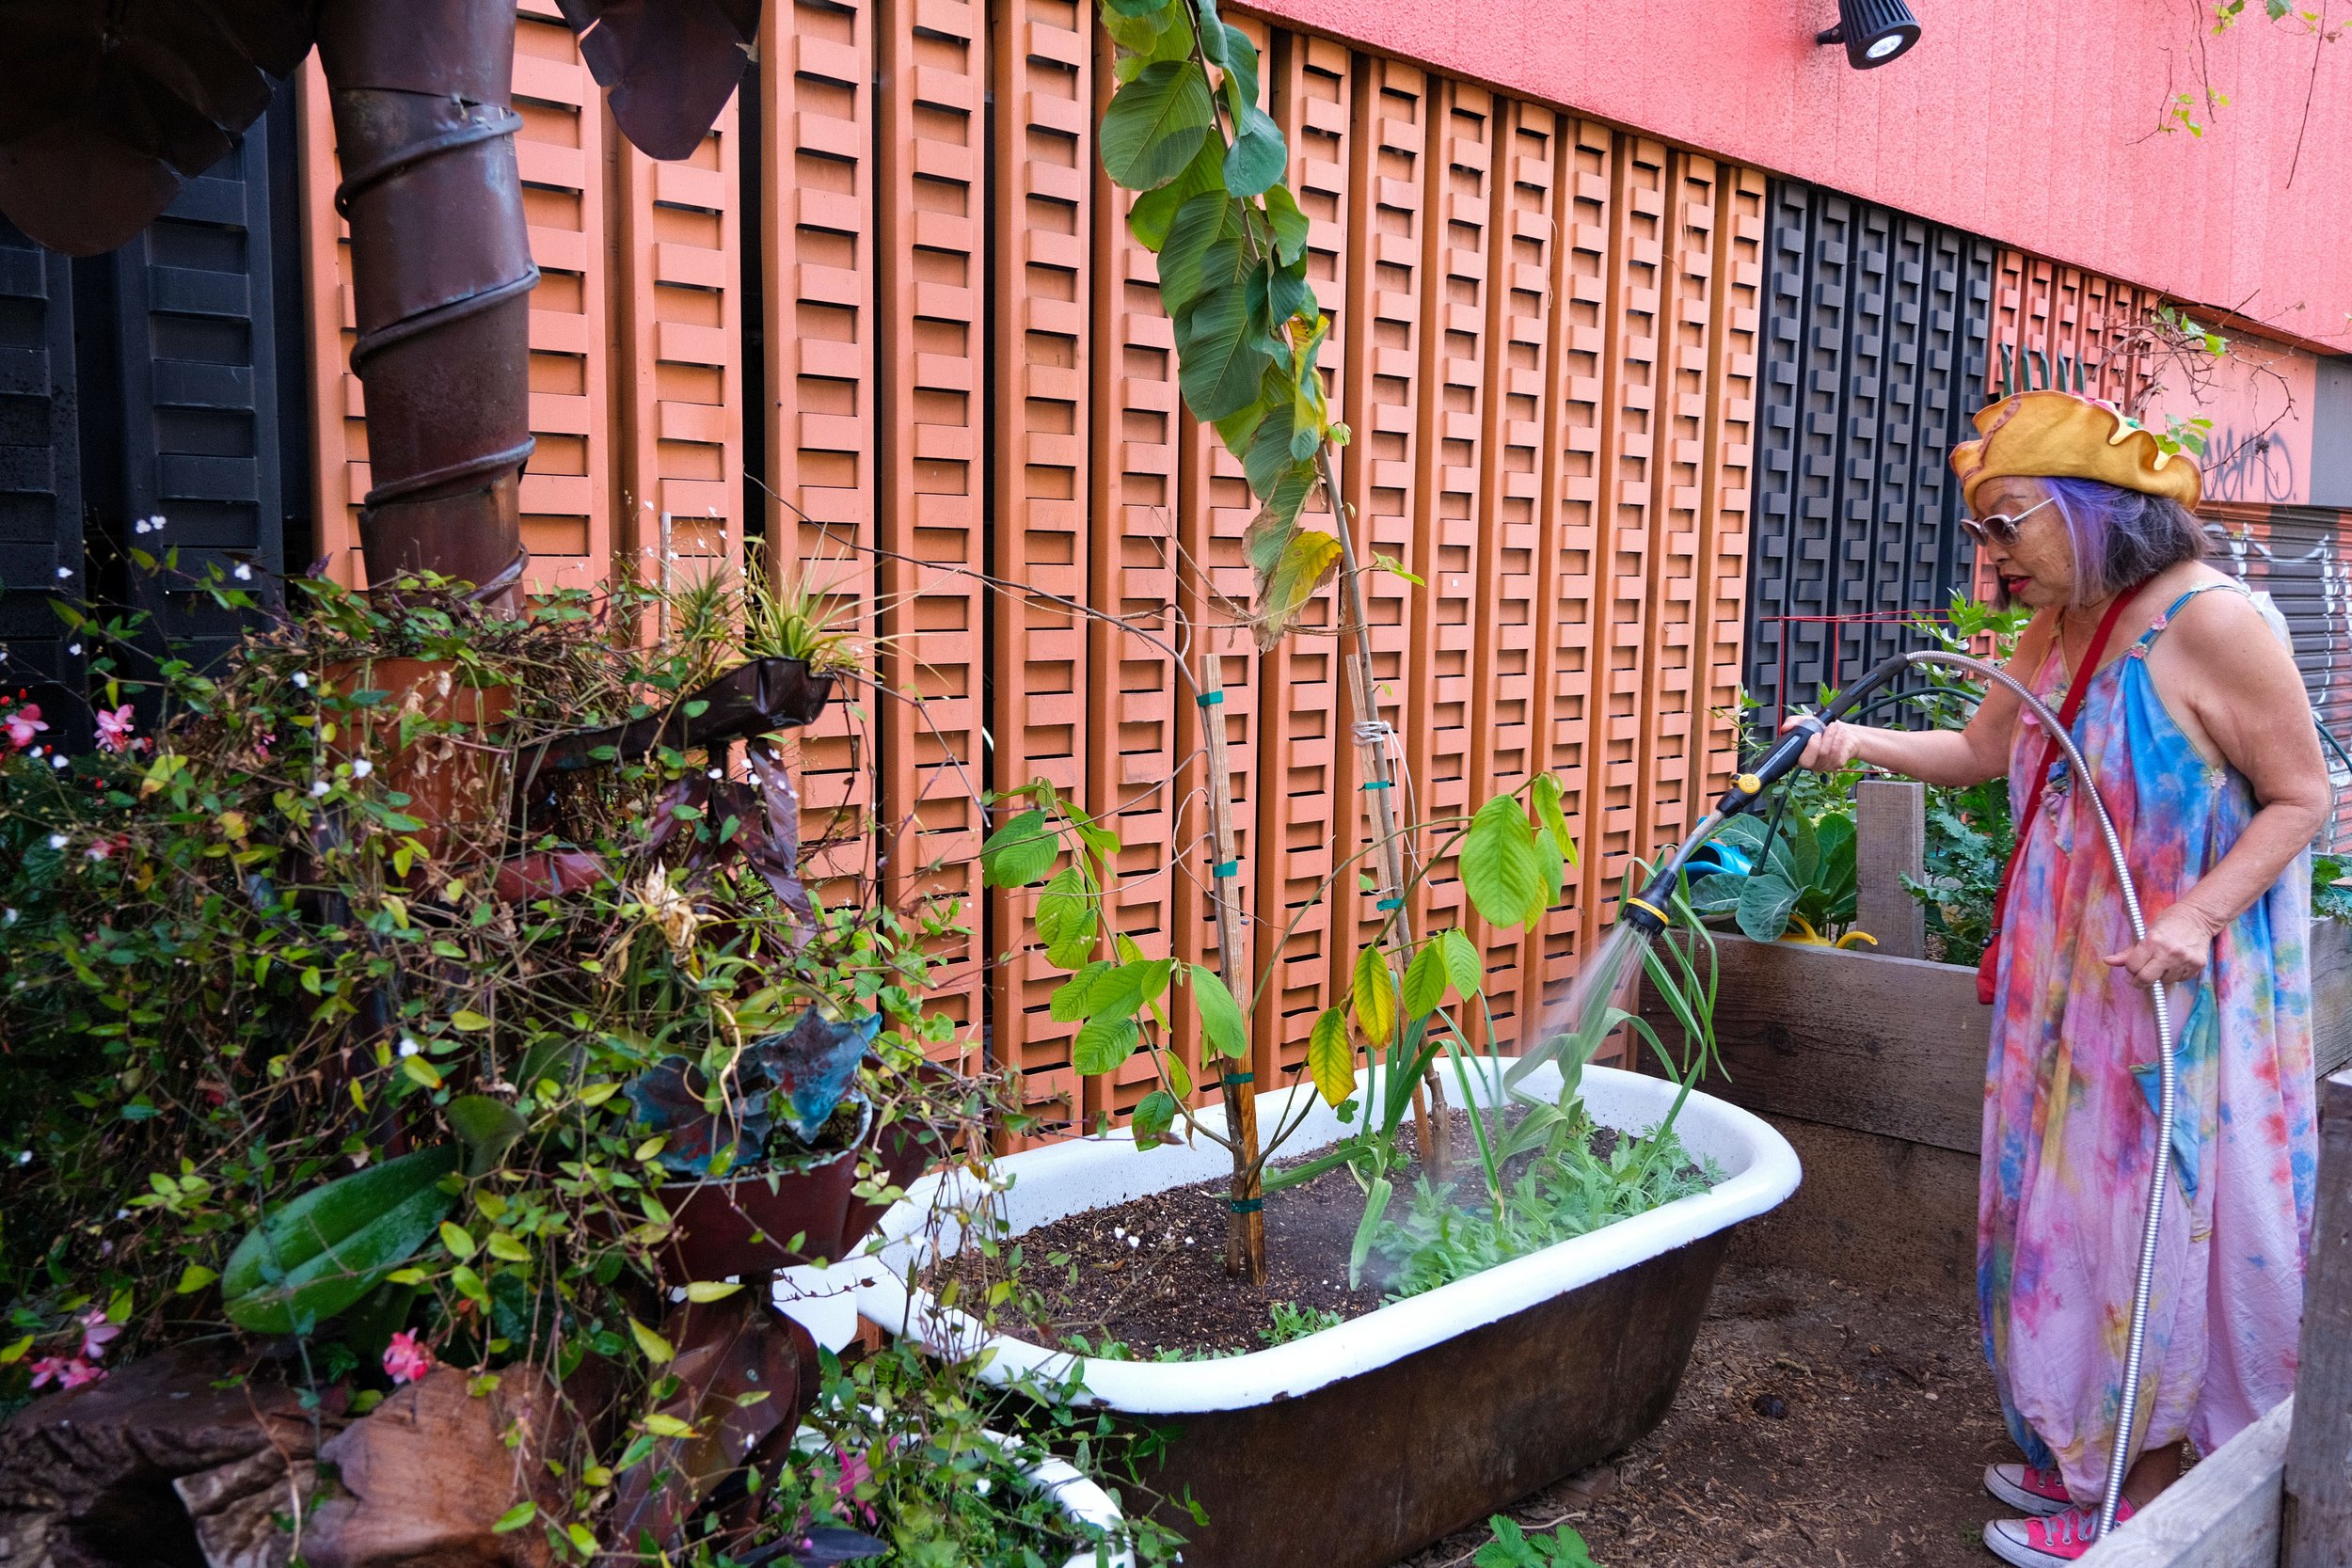  Rain Boe Wave waters plants that have been planted inside of an old bathtub. “By summertime, there will be poppies blooming from here,” Waves said. Spring Street Community Garden in Downtown Los Angeles on Monday, March 21, 2022. (Anna Sophia Moltke